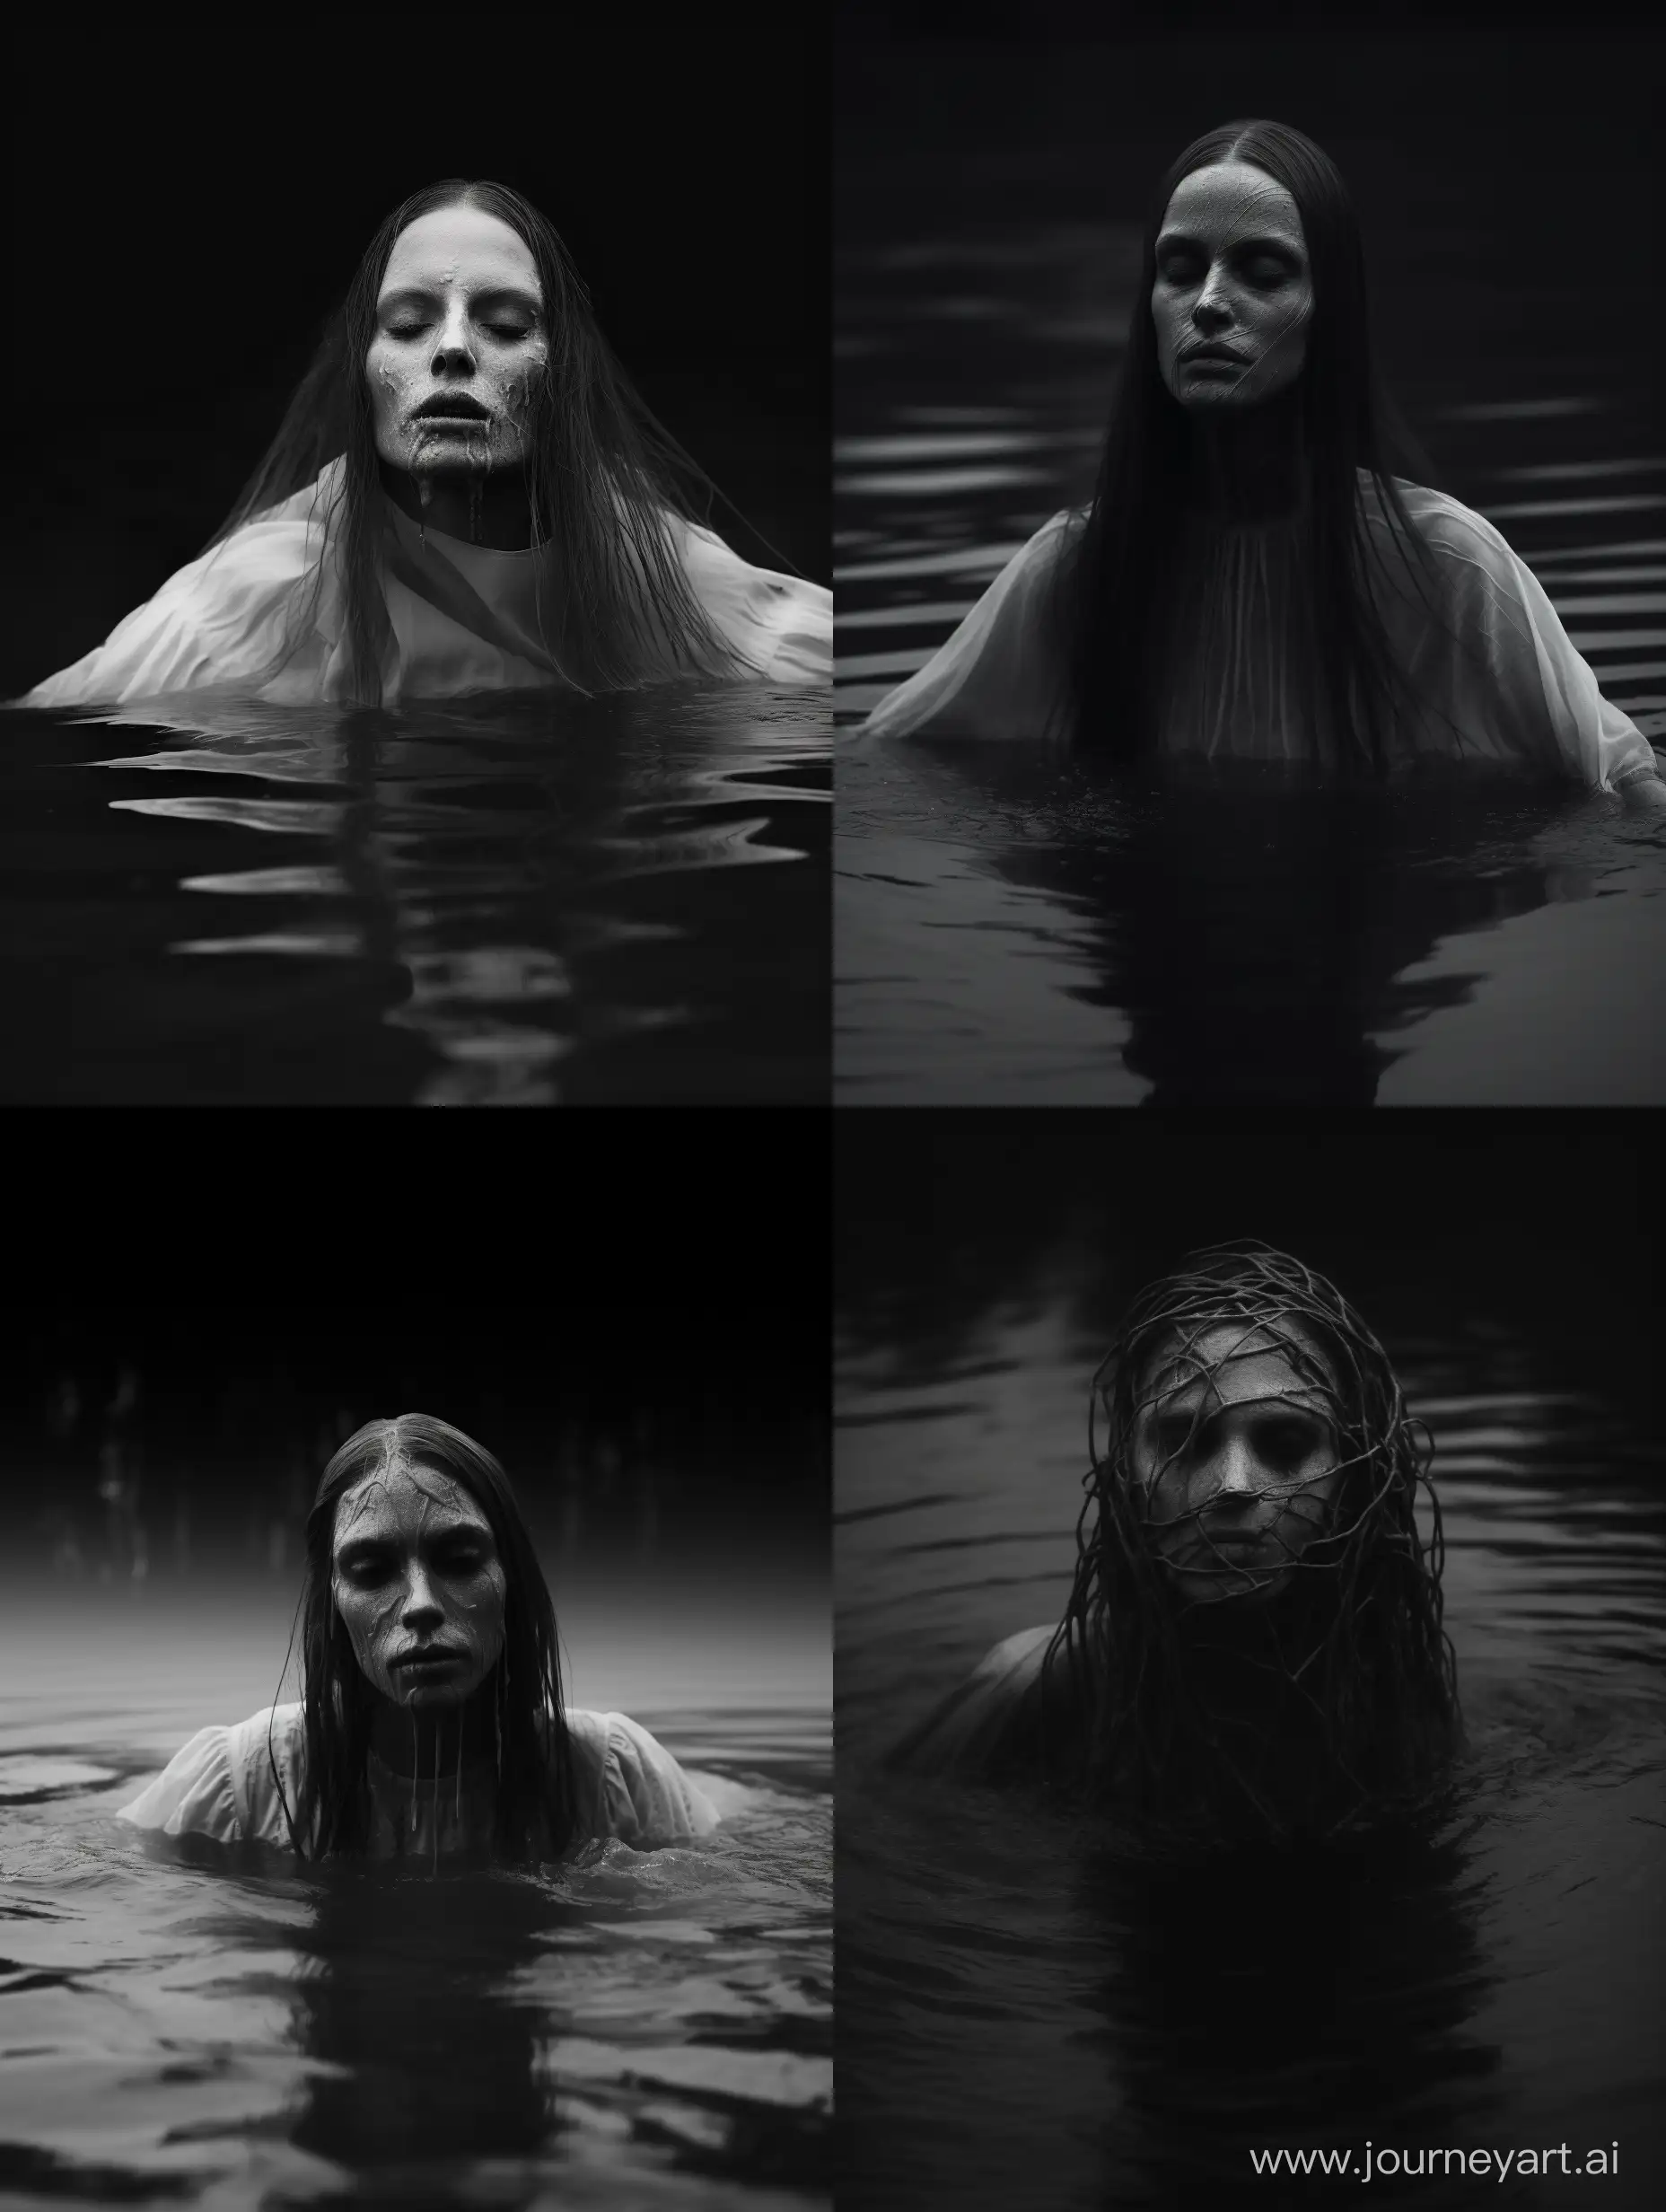 Eerie-Pagan-Horror-Woman-Emerging-from-Murky-Waters-in-Grayscale